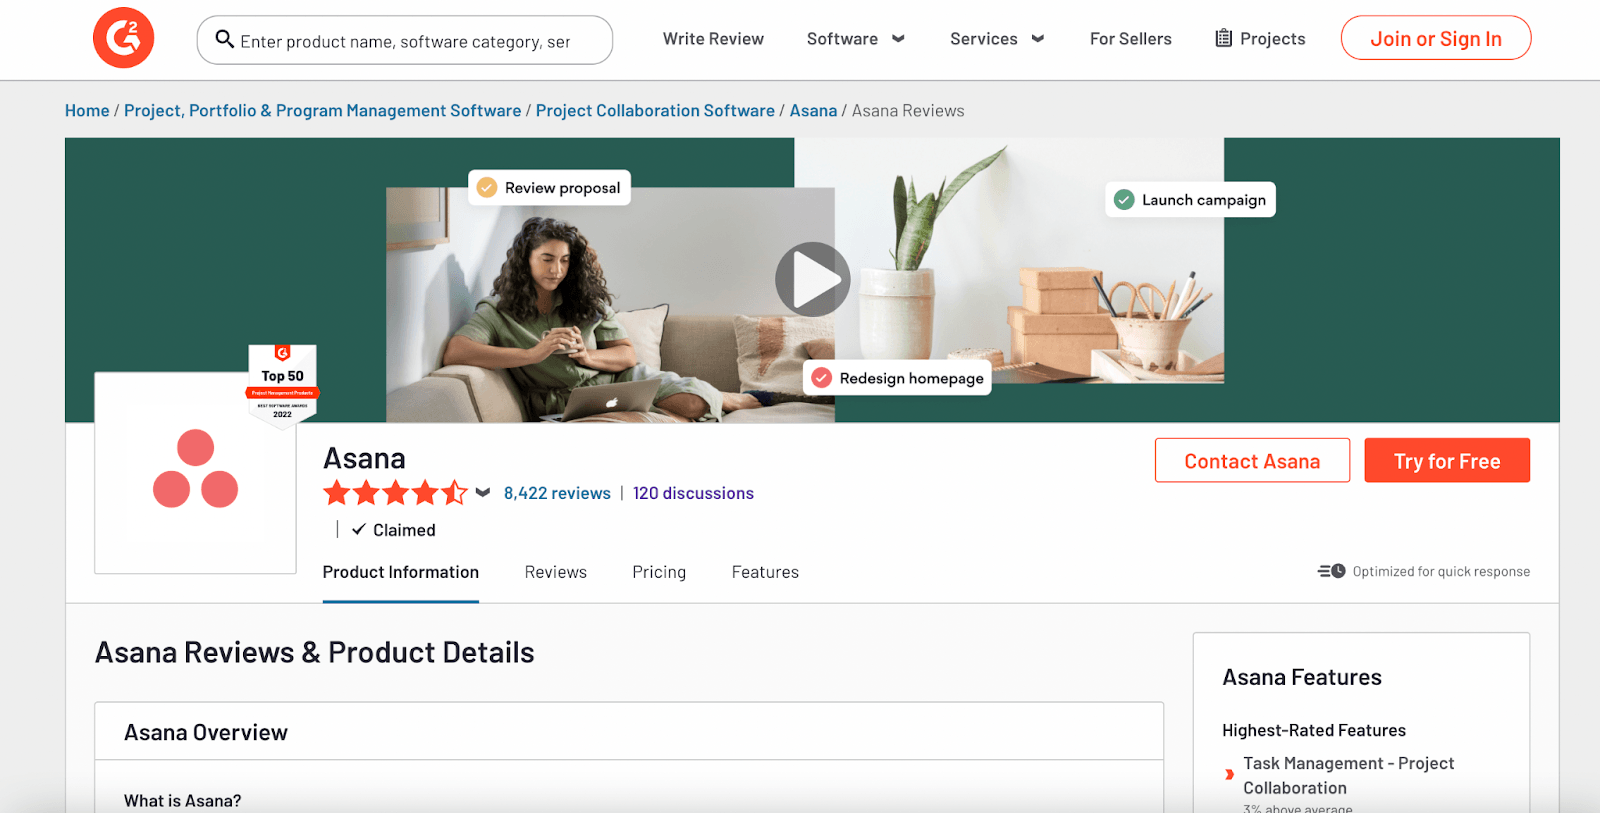 Review summary for Asana. Reviews and Product details.